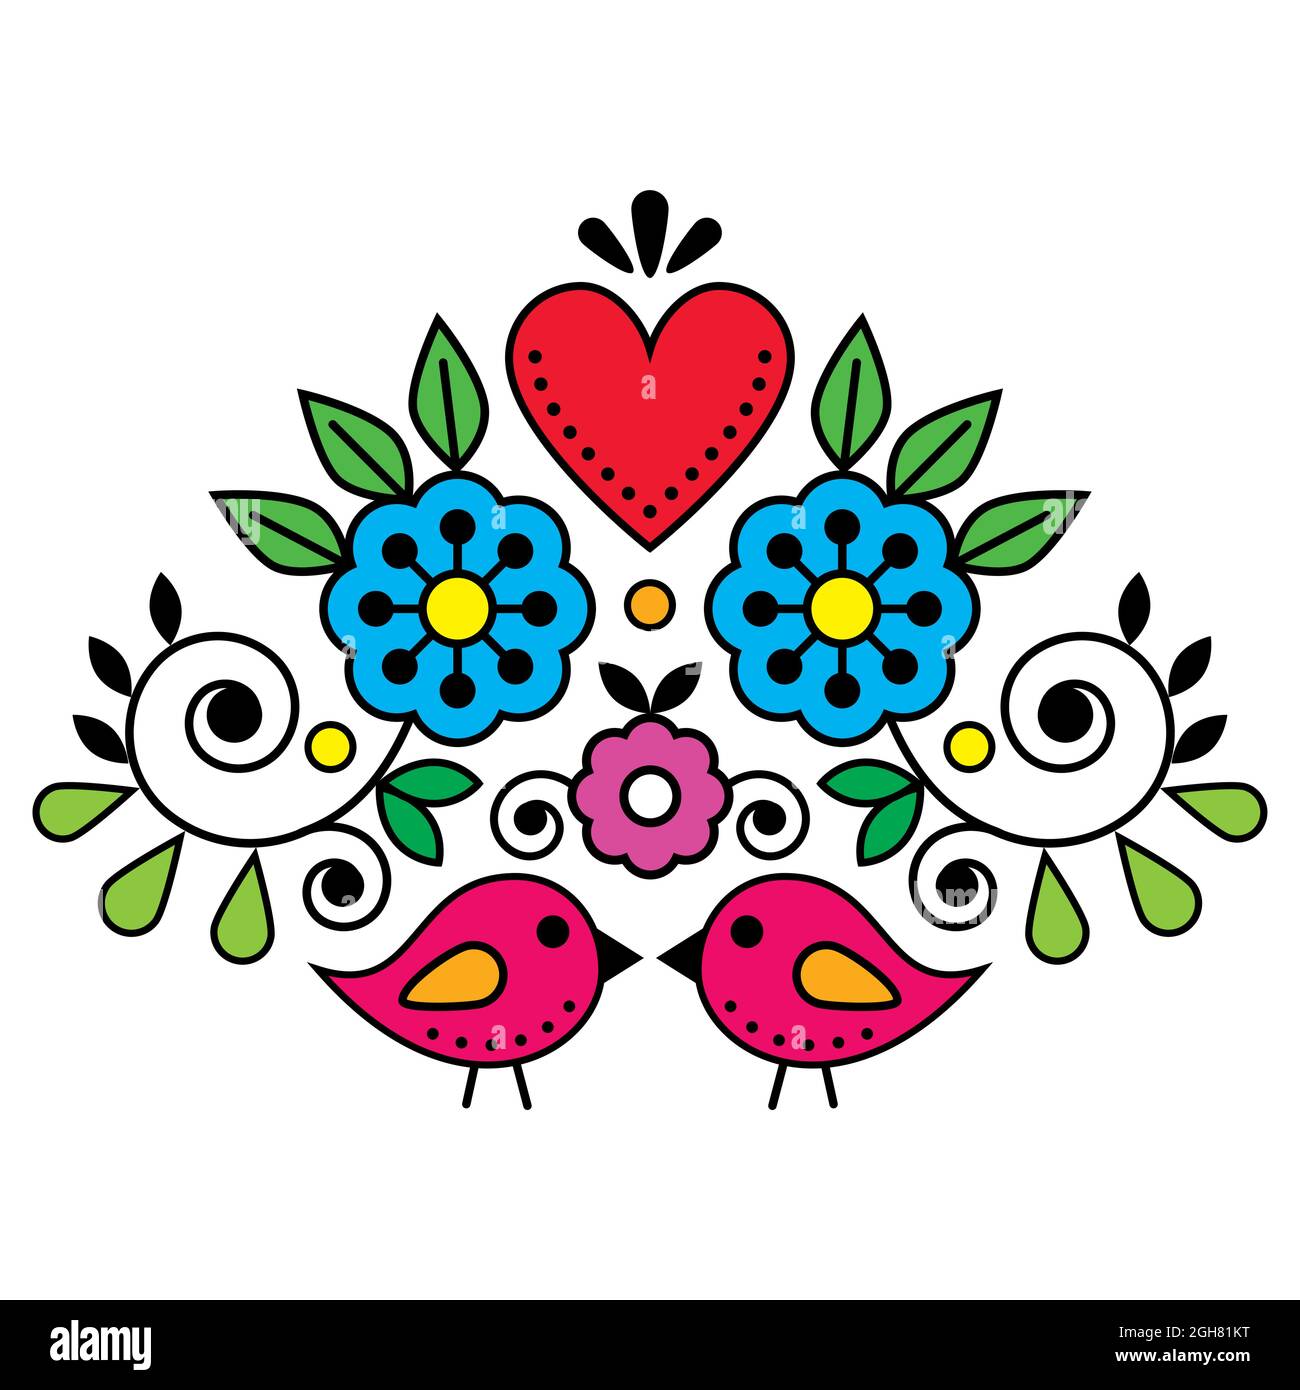 Swedish folk art vector cute pattern with birds, heart, and flowers inspired by the traditional Scandinavian art - Valentine's Day greeting card or we Stock Vector